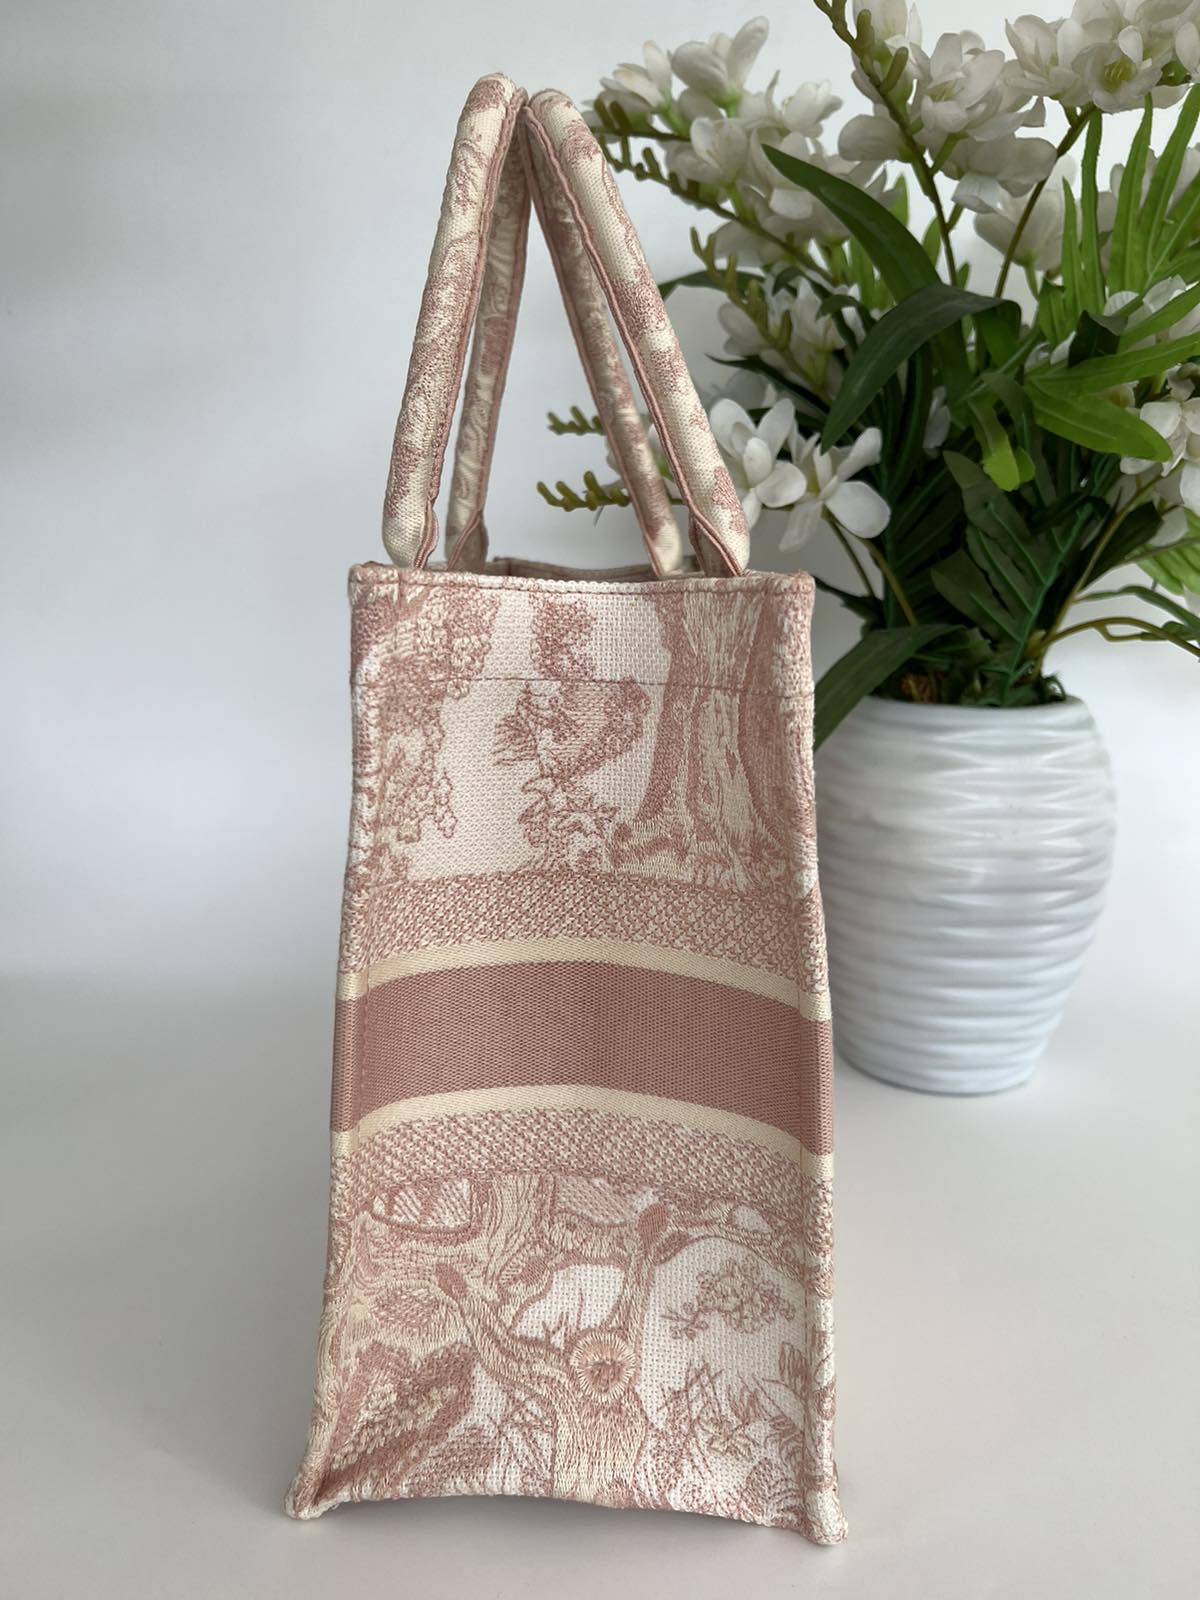 SOLD/LAYAWAY💕 Dior Book Tote Pink Toile De Jouy Old Small. Made in Italy.  With authenticity card, dustbag & certificate of authenticity from ENTRUPY